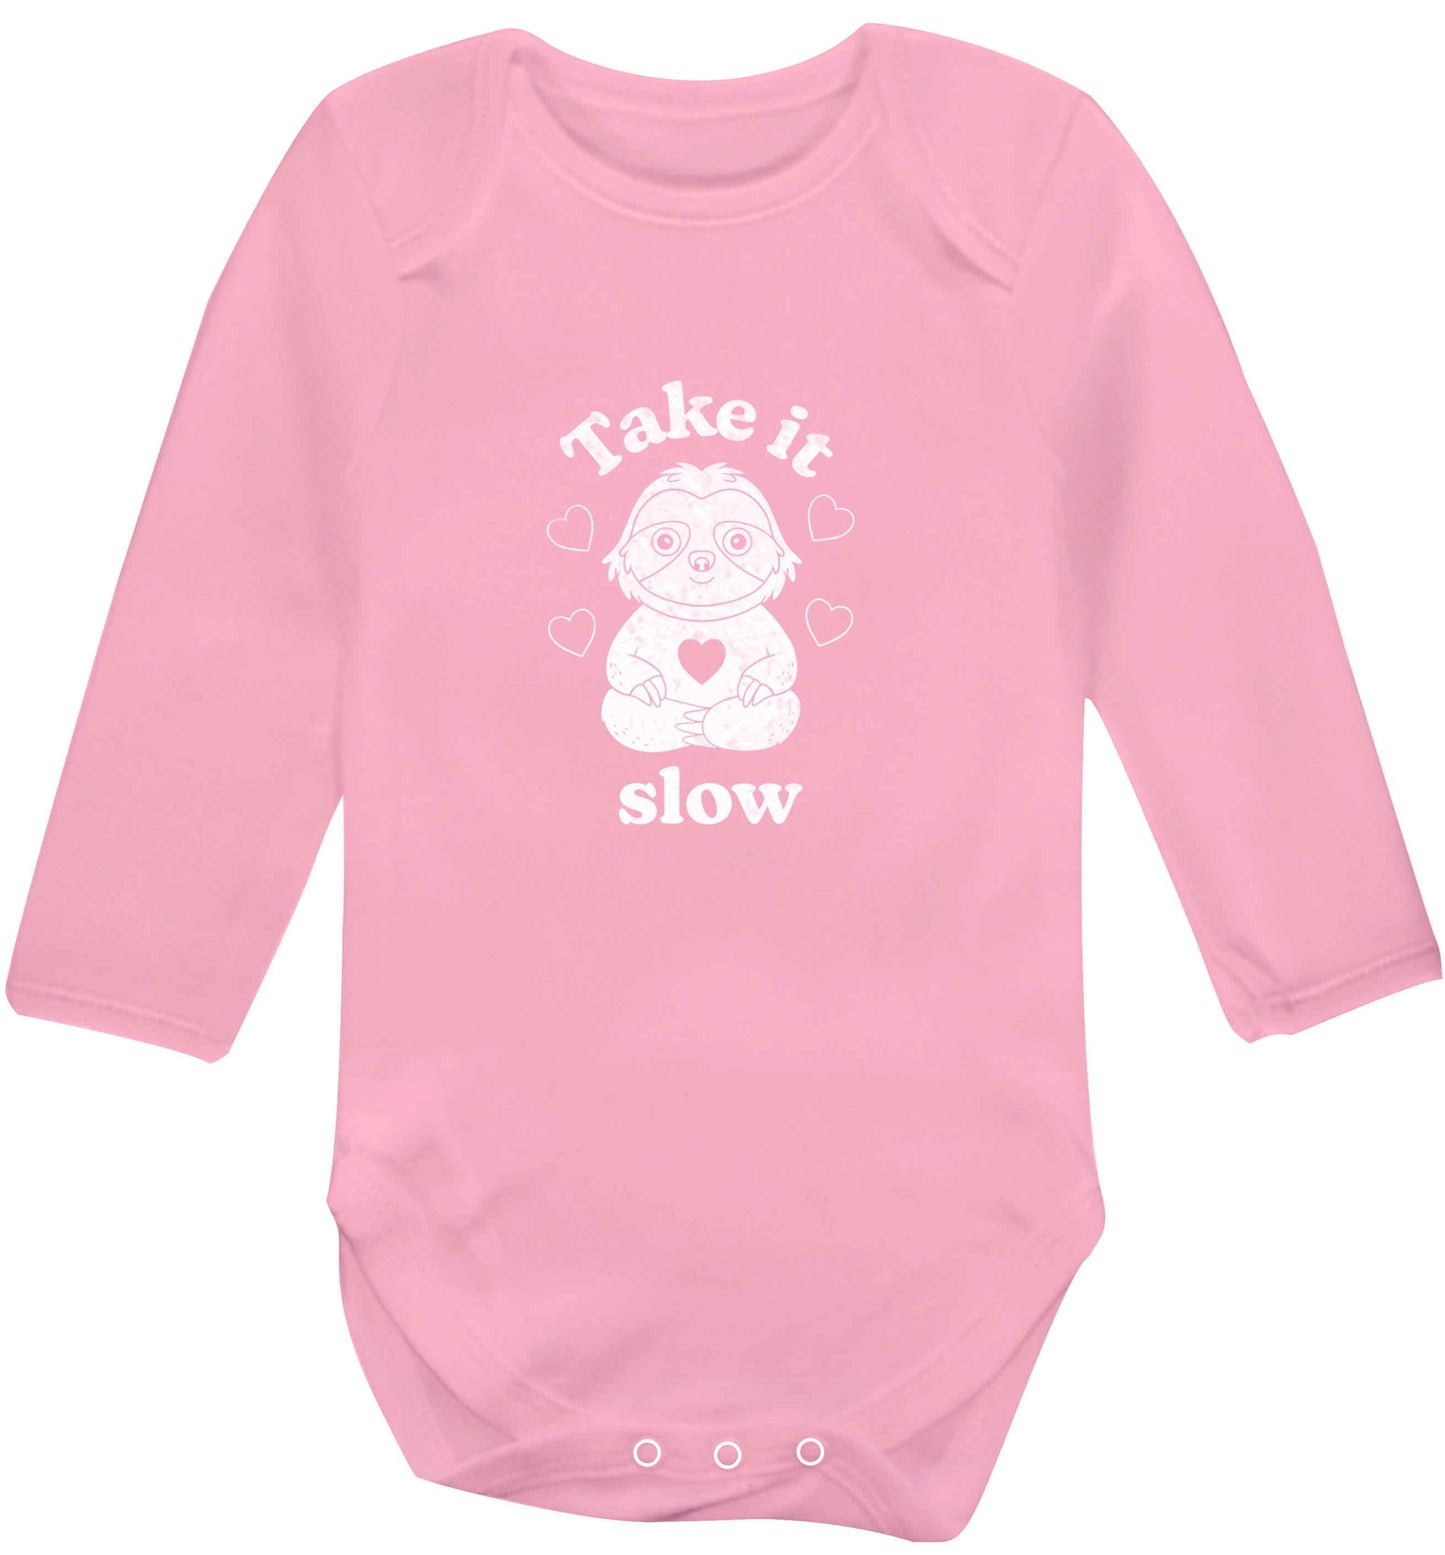 Take it slow baby vest long sleeved pale pink 6-12 months